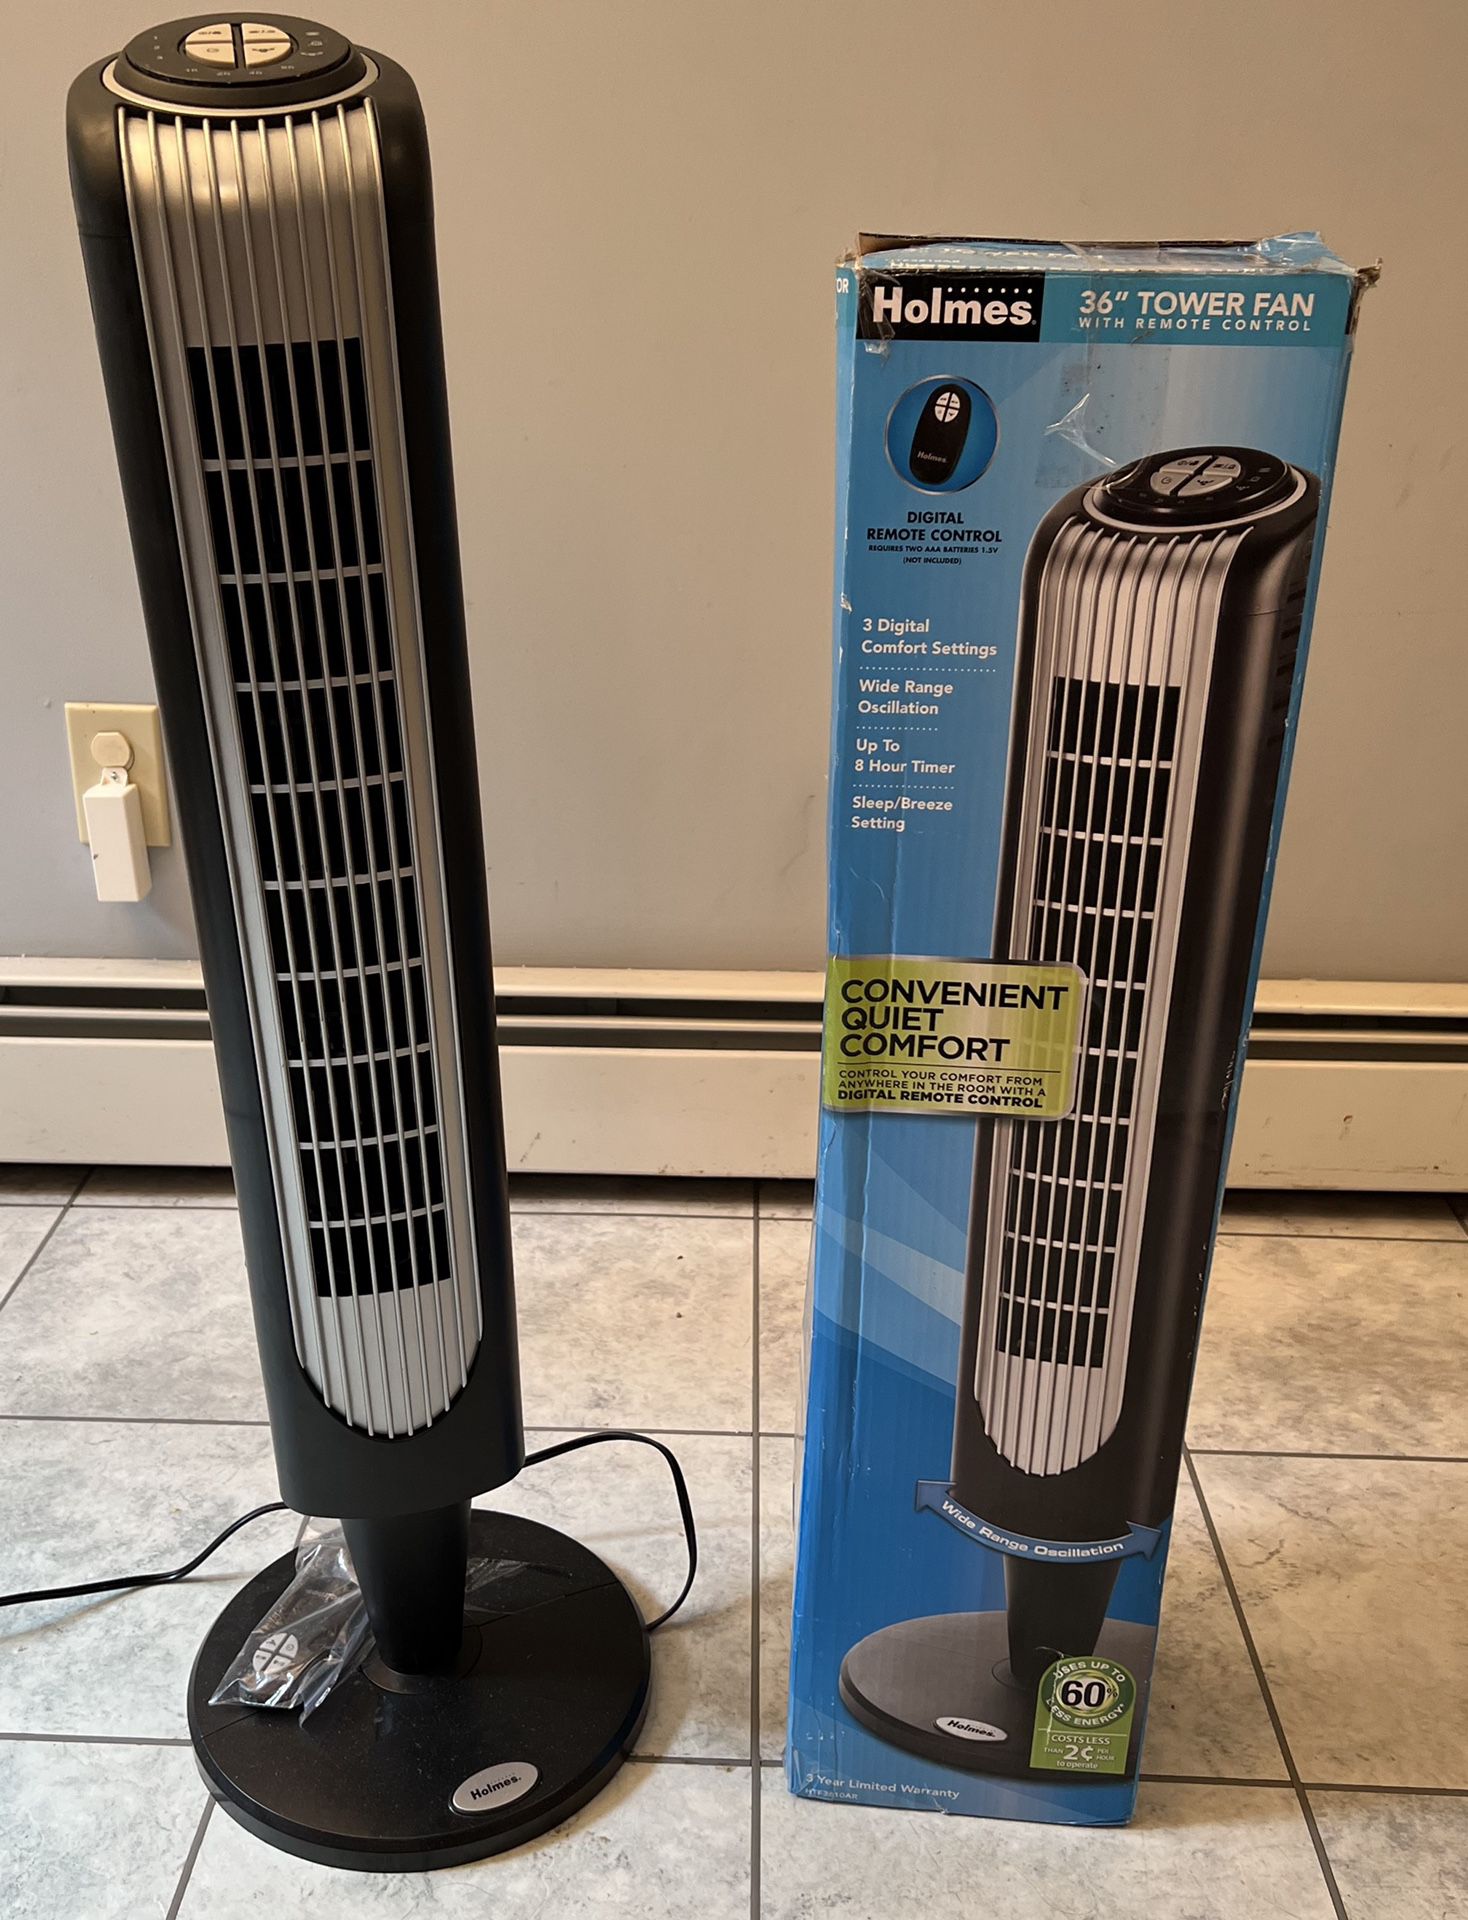 Holmes 36” Tower Fan, 3 Digital Comfort Settings & Up To 8 Hours Timer